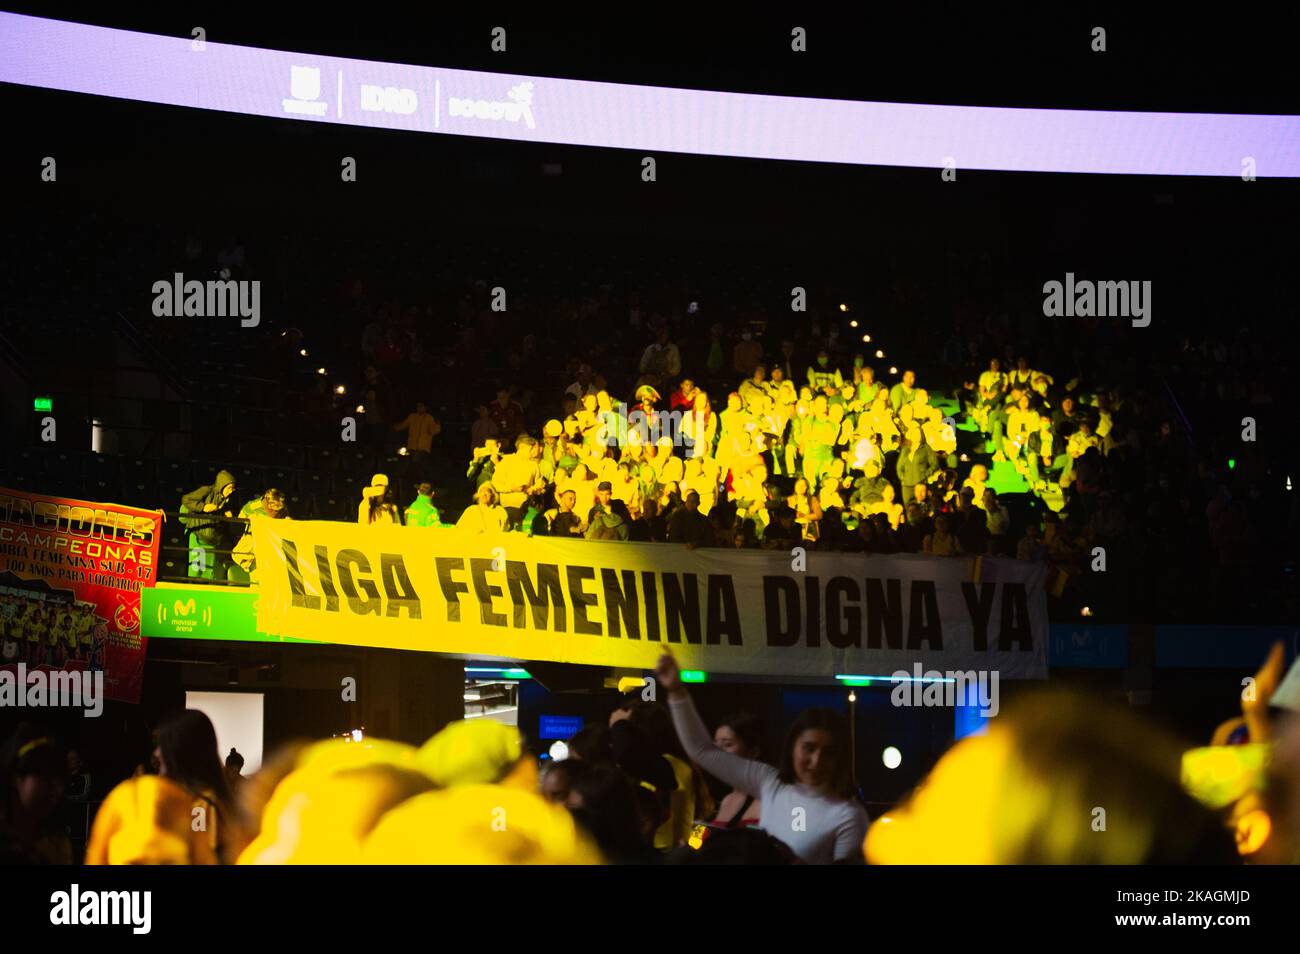 Bogota, Colombia. 02nd Nov, 2022. Fans hang a sign that reads 'Dignified womens leage' during the welcoming of Colombia's FIFA U-17 Womens team after the U-17 World Cup after reaching the final match against Spain, in Bogota, Colombia, November 2, 2022. Photo by: Chepa Beltran/Long Visual Press Credit: Long Visual Press/Alamy Live News Stock Photo